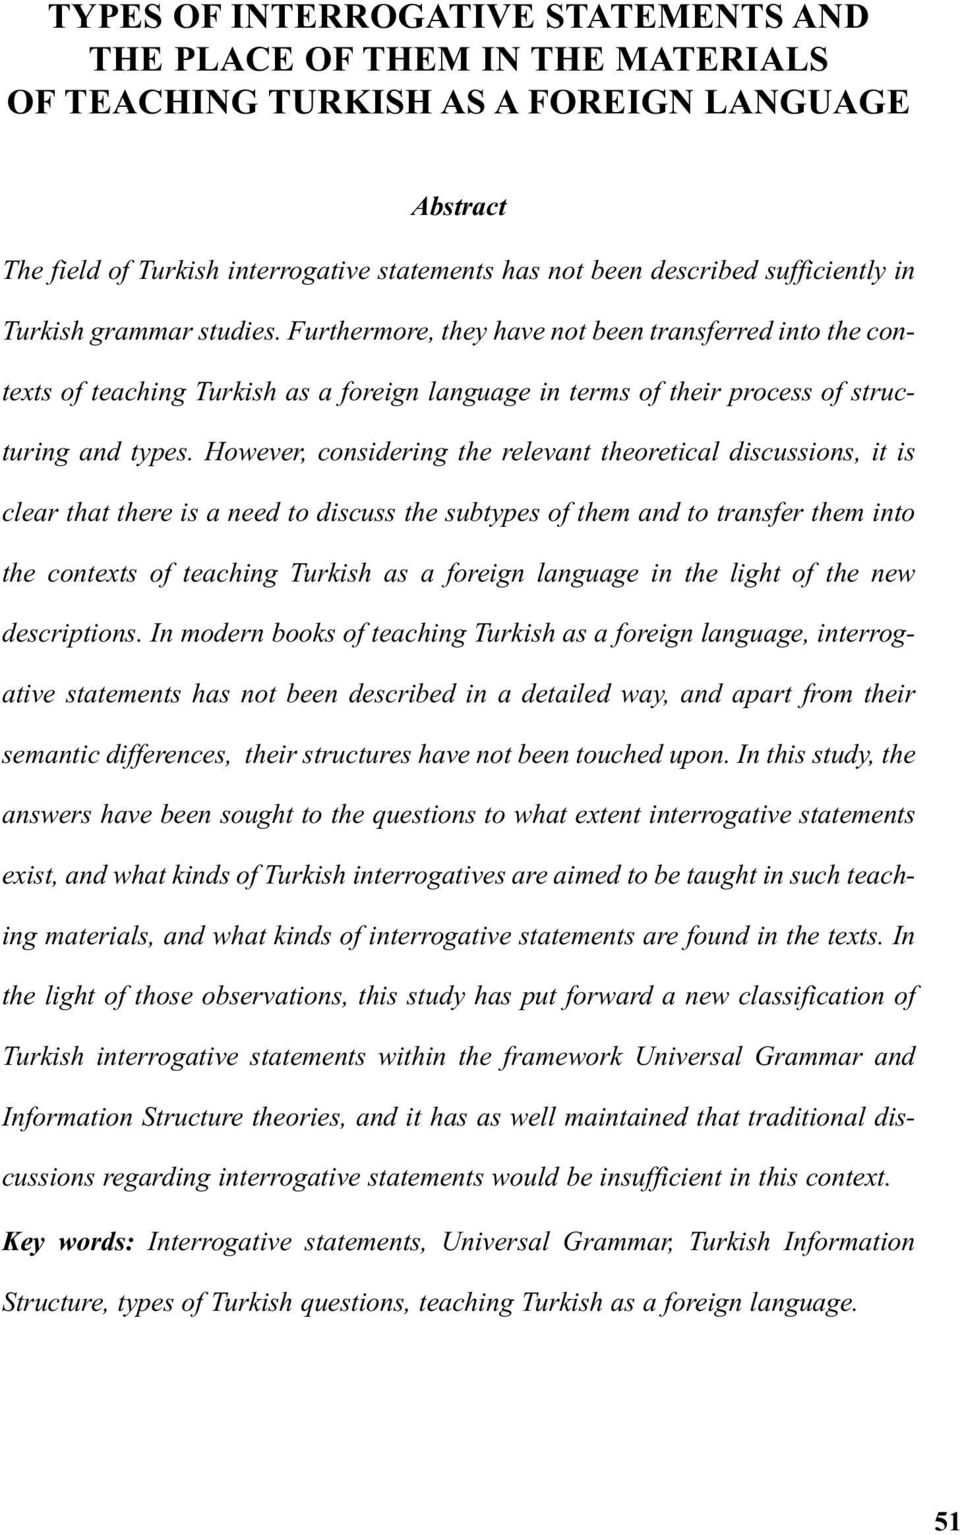 However, considering the relevant theoretical discussions, it is clear that there is a need to discuss the subtypes of them and to transfer them into the contexts of teaching Turkish as a foreign